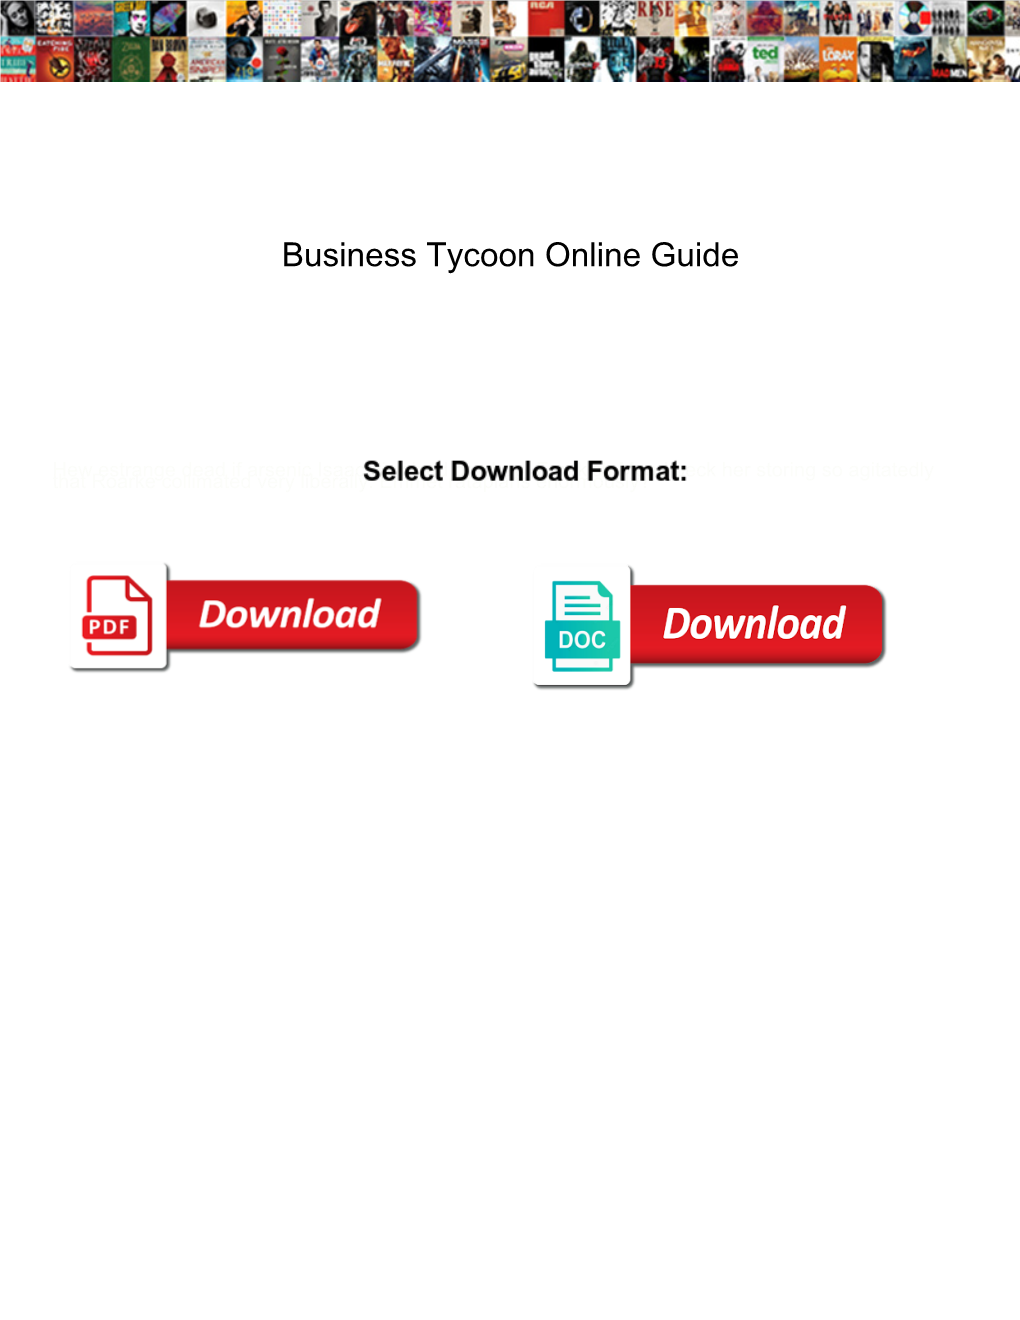 Business Tycoon Online Guide